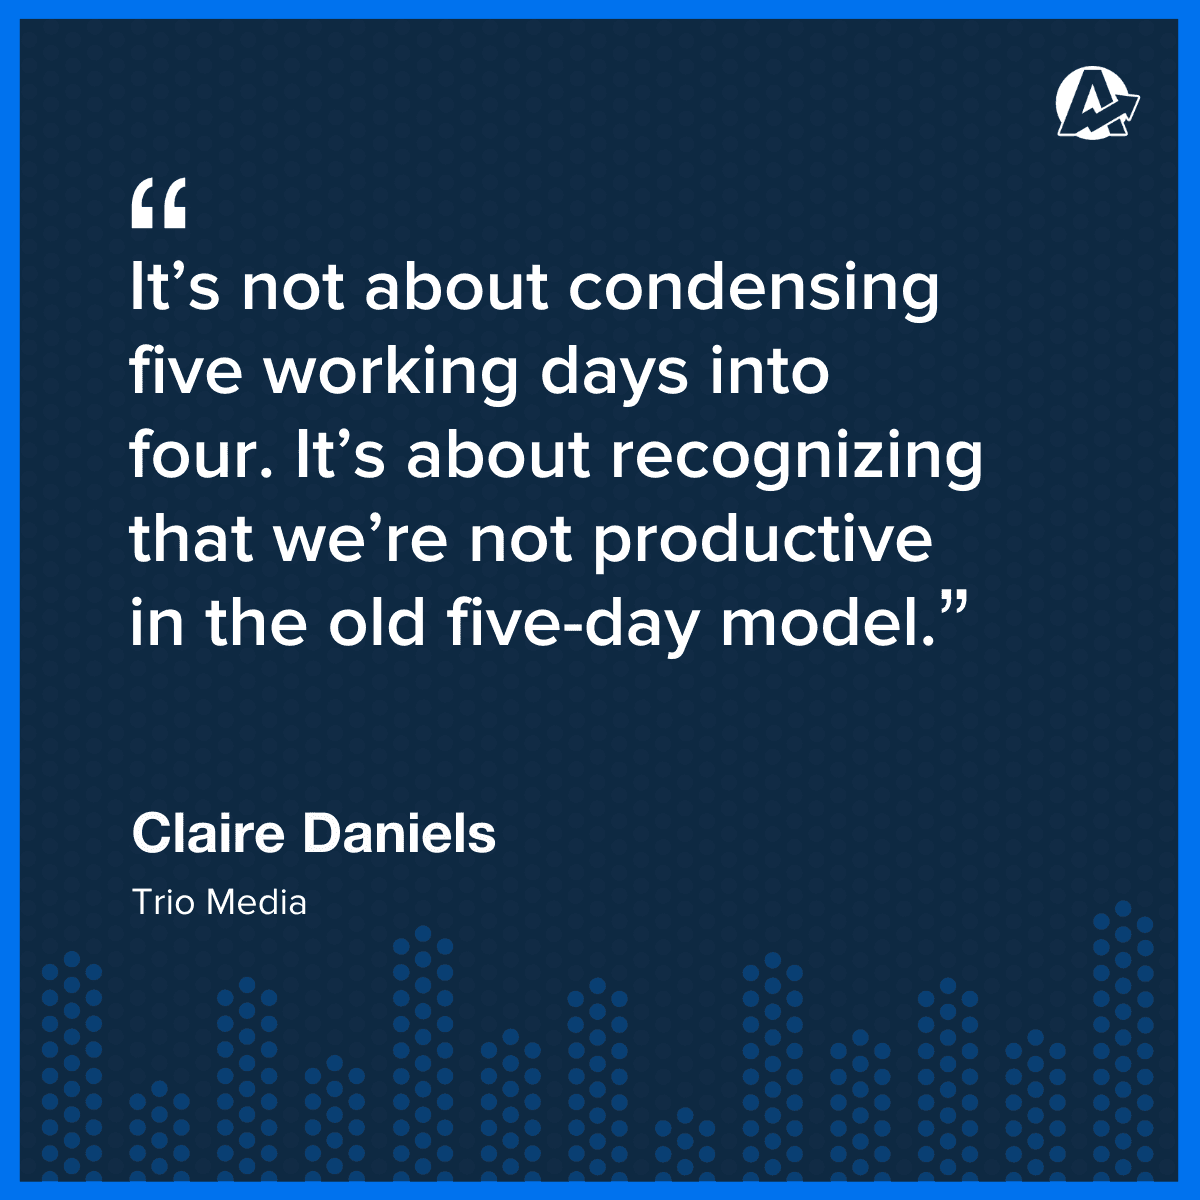 Claire Daniels Trio Media 4-day Work Week Quote